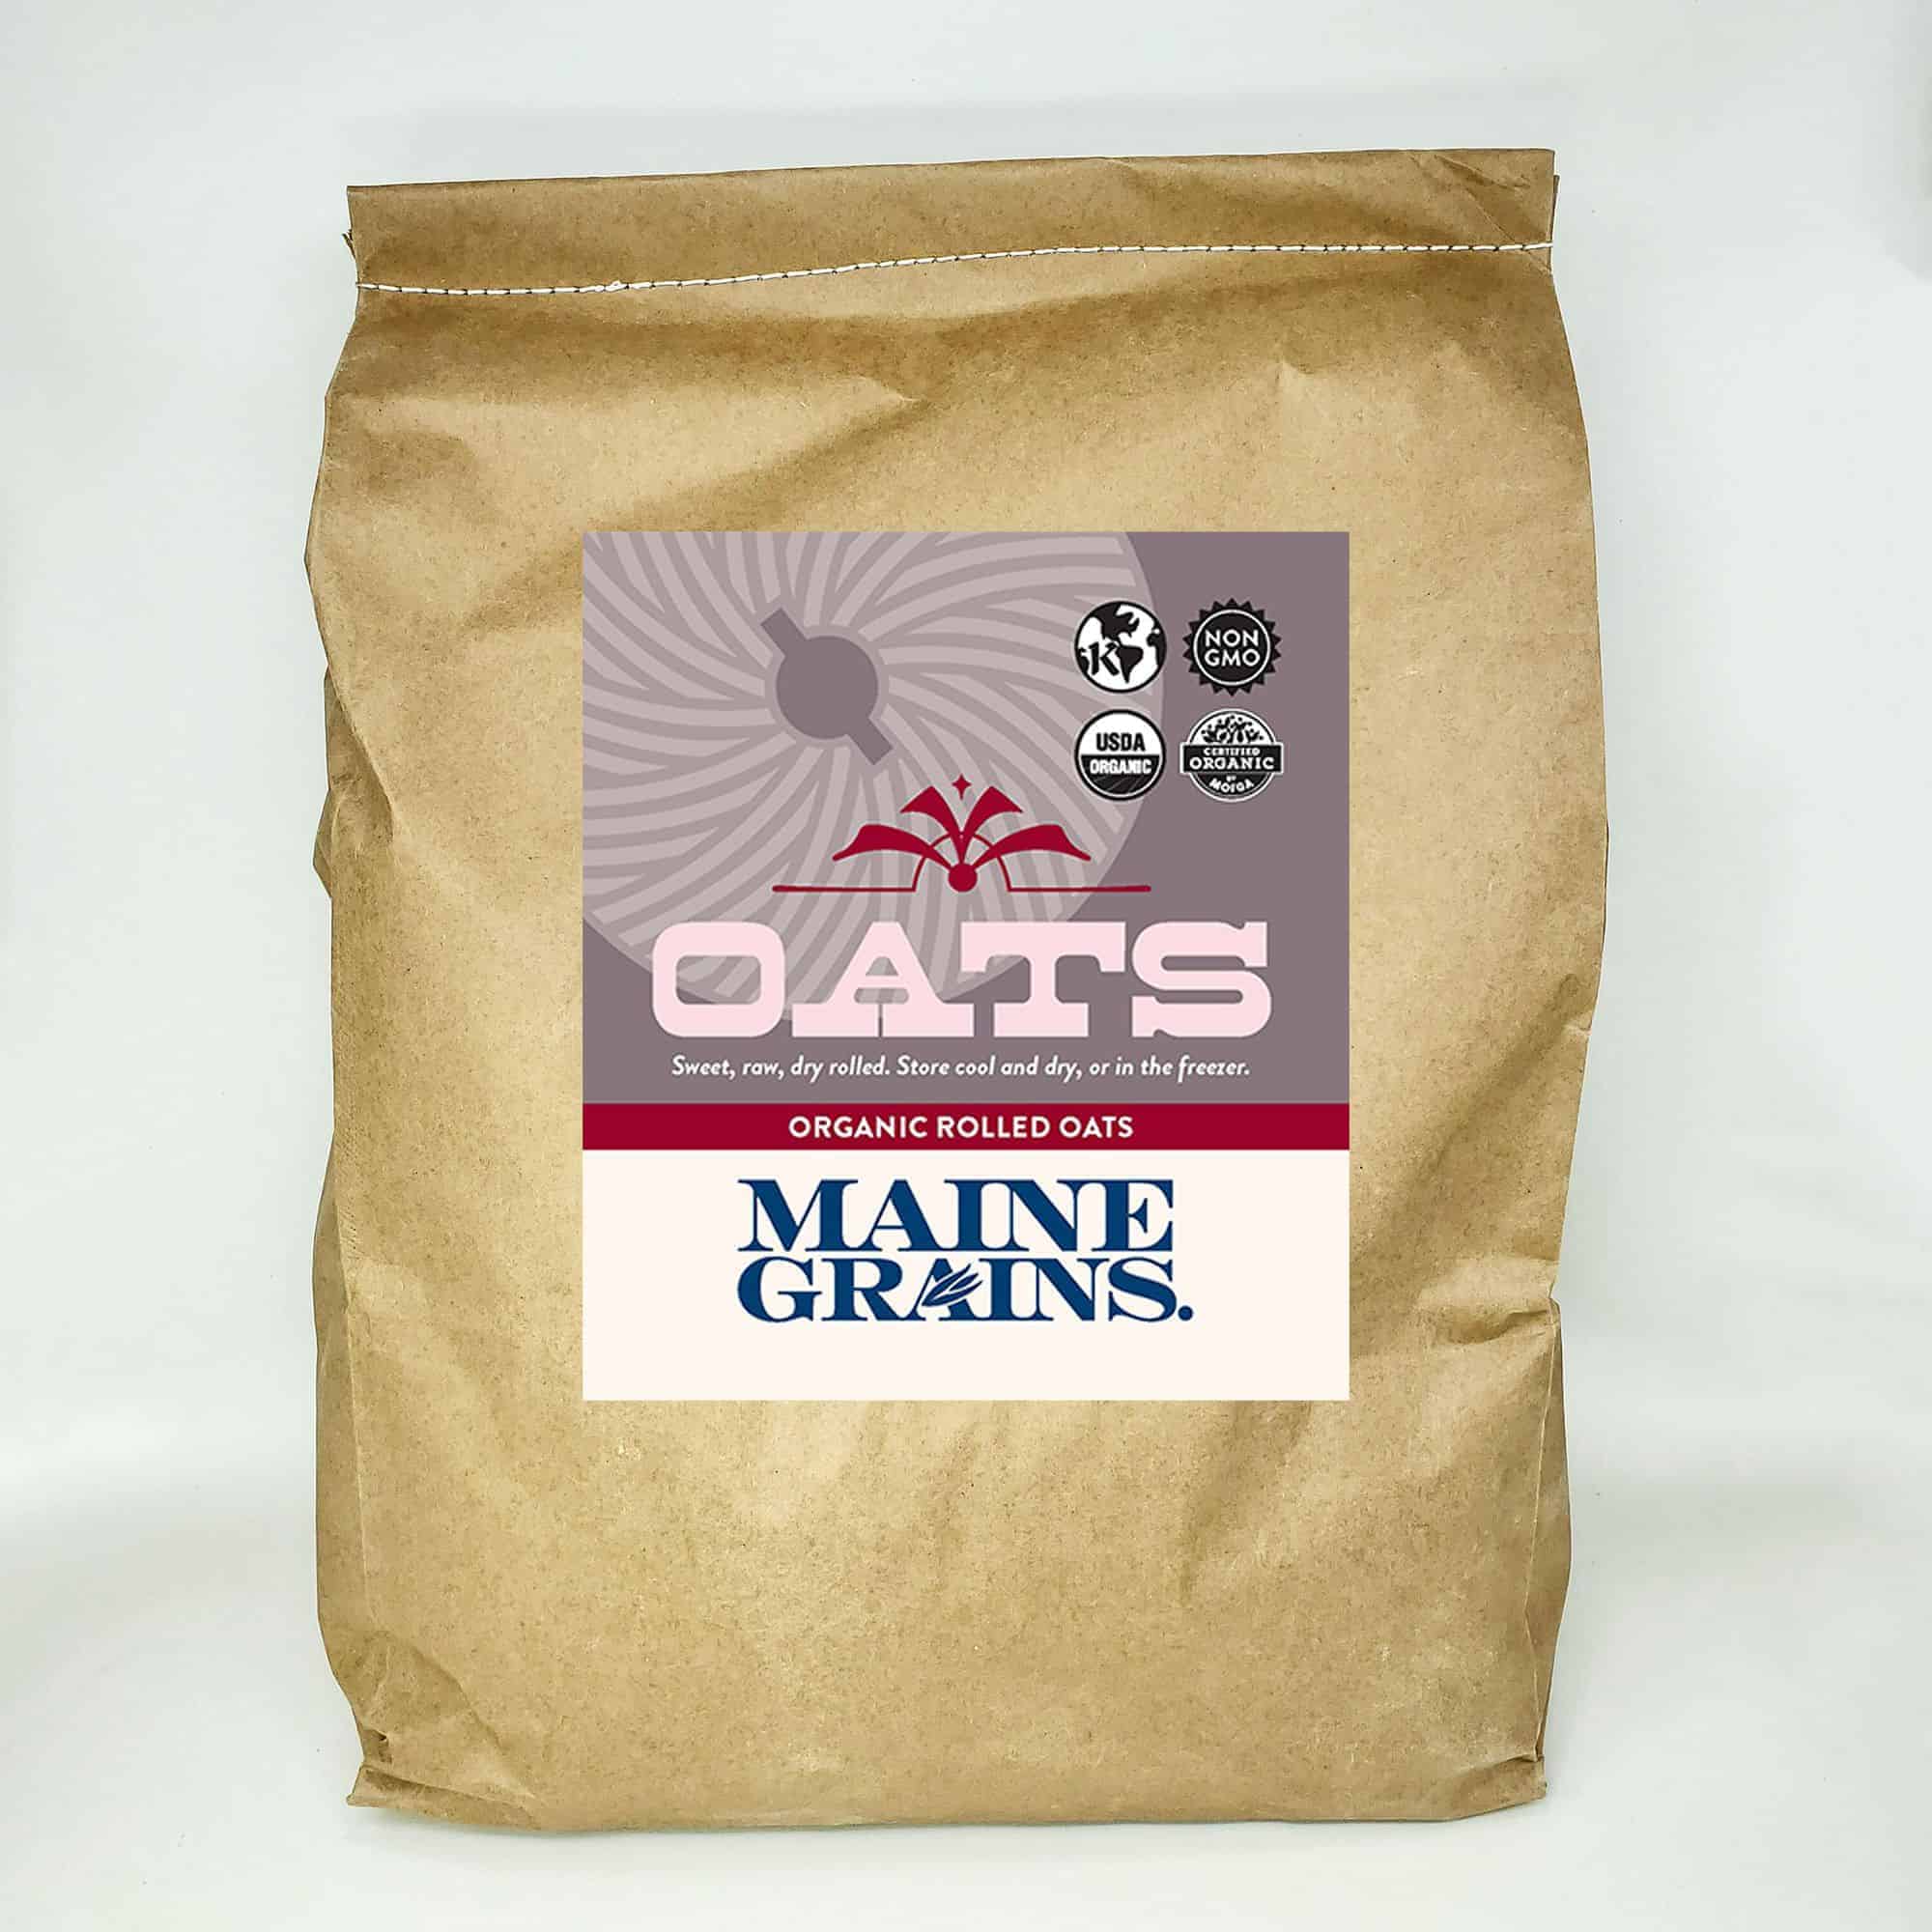 20 lbs. Organic Rolled Oats - Maine Grains